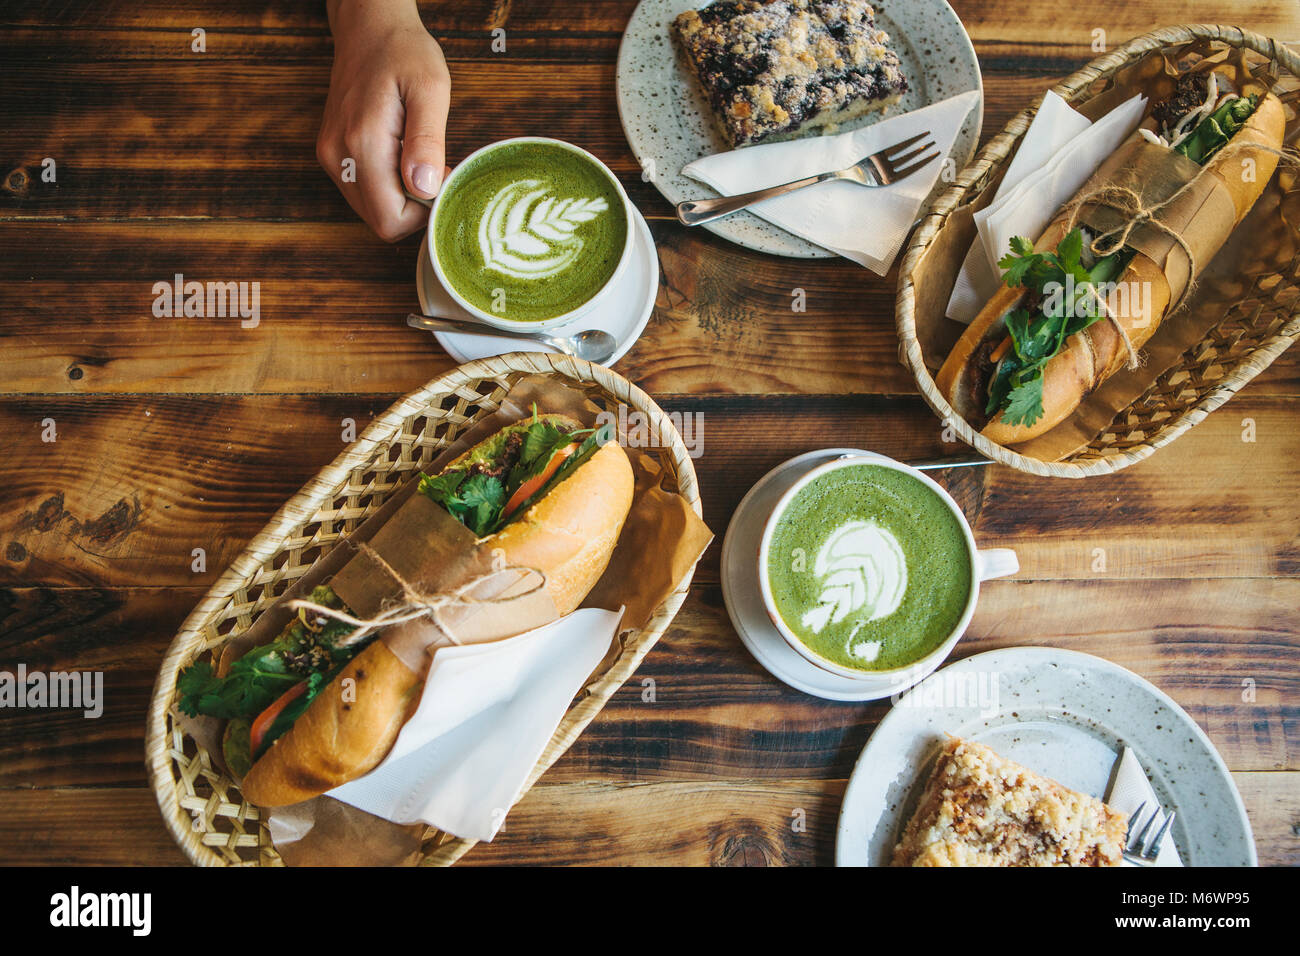 Top view - The girl sitting in cafe and holding mug with green tea with milk next to piece of sweet pie and two sandwiches with vegetables. Stock Photo